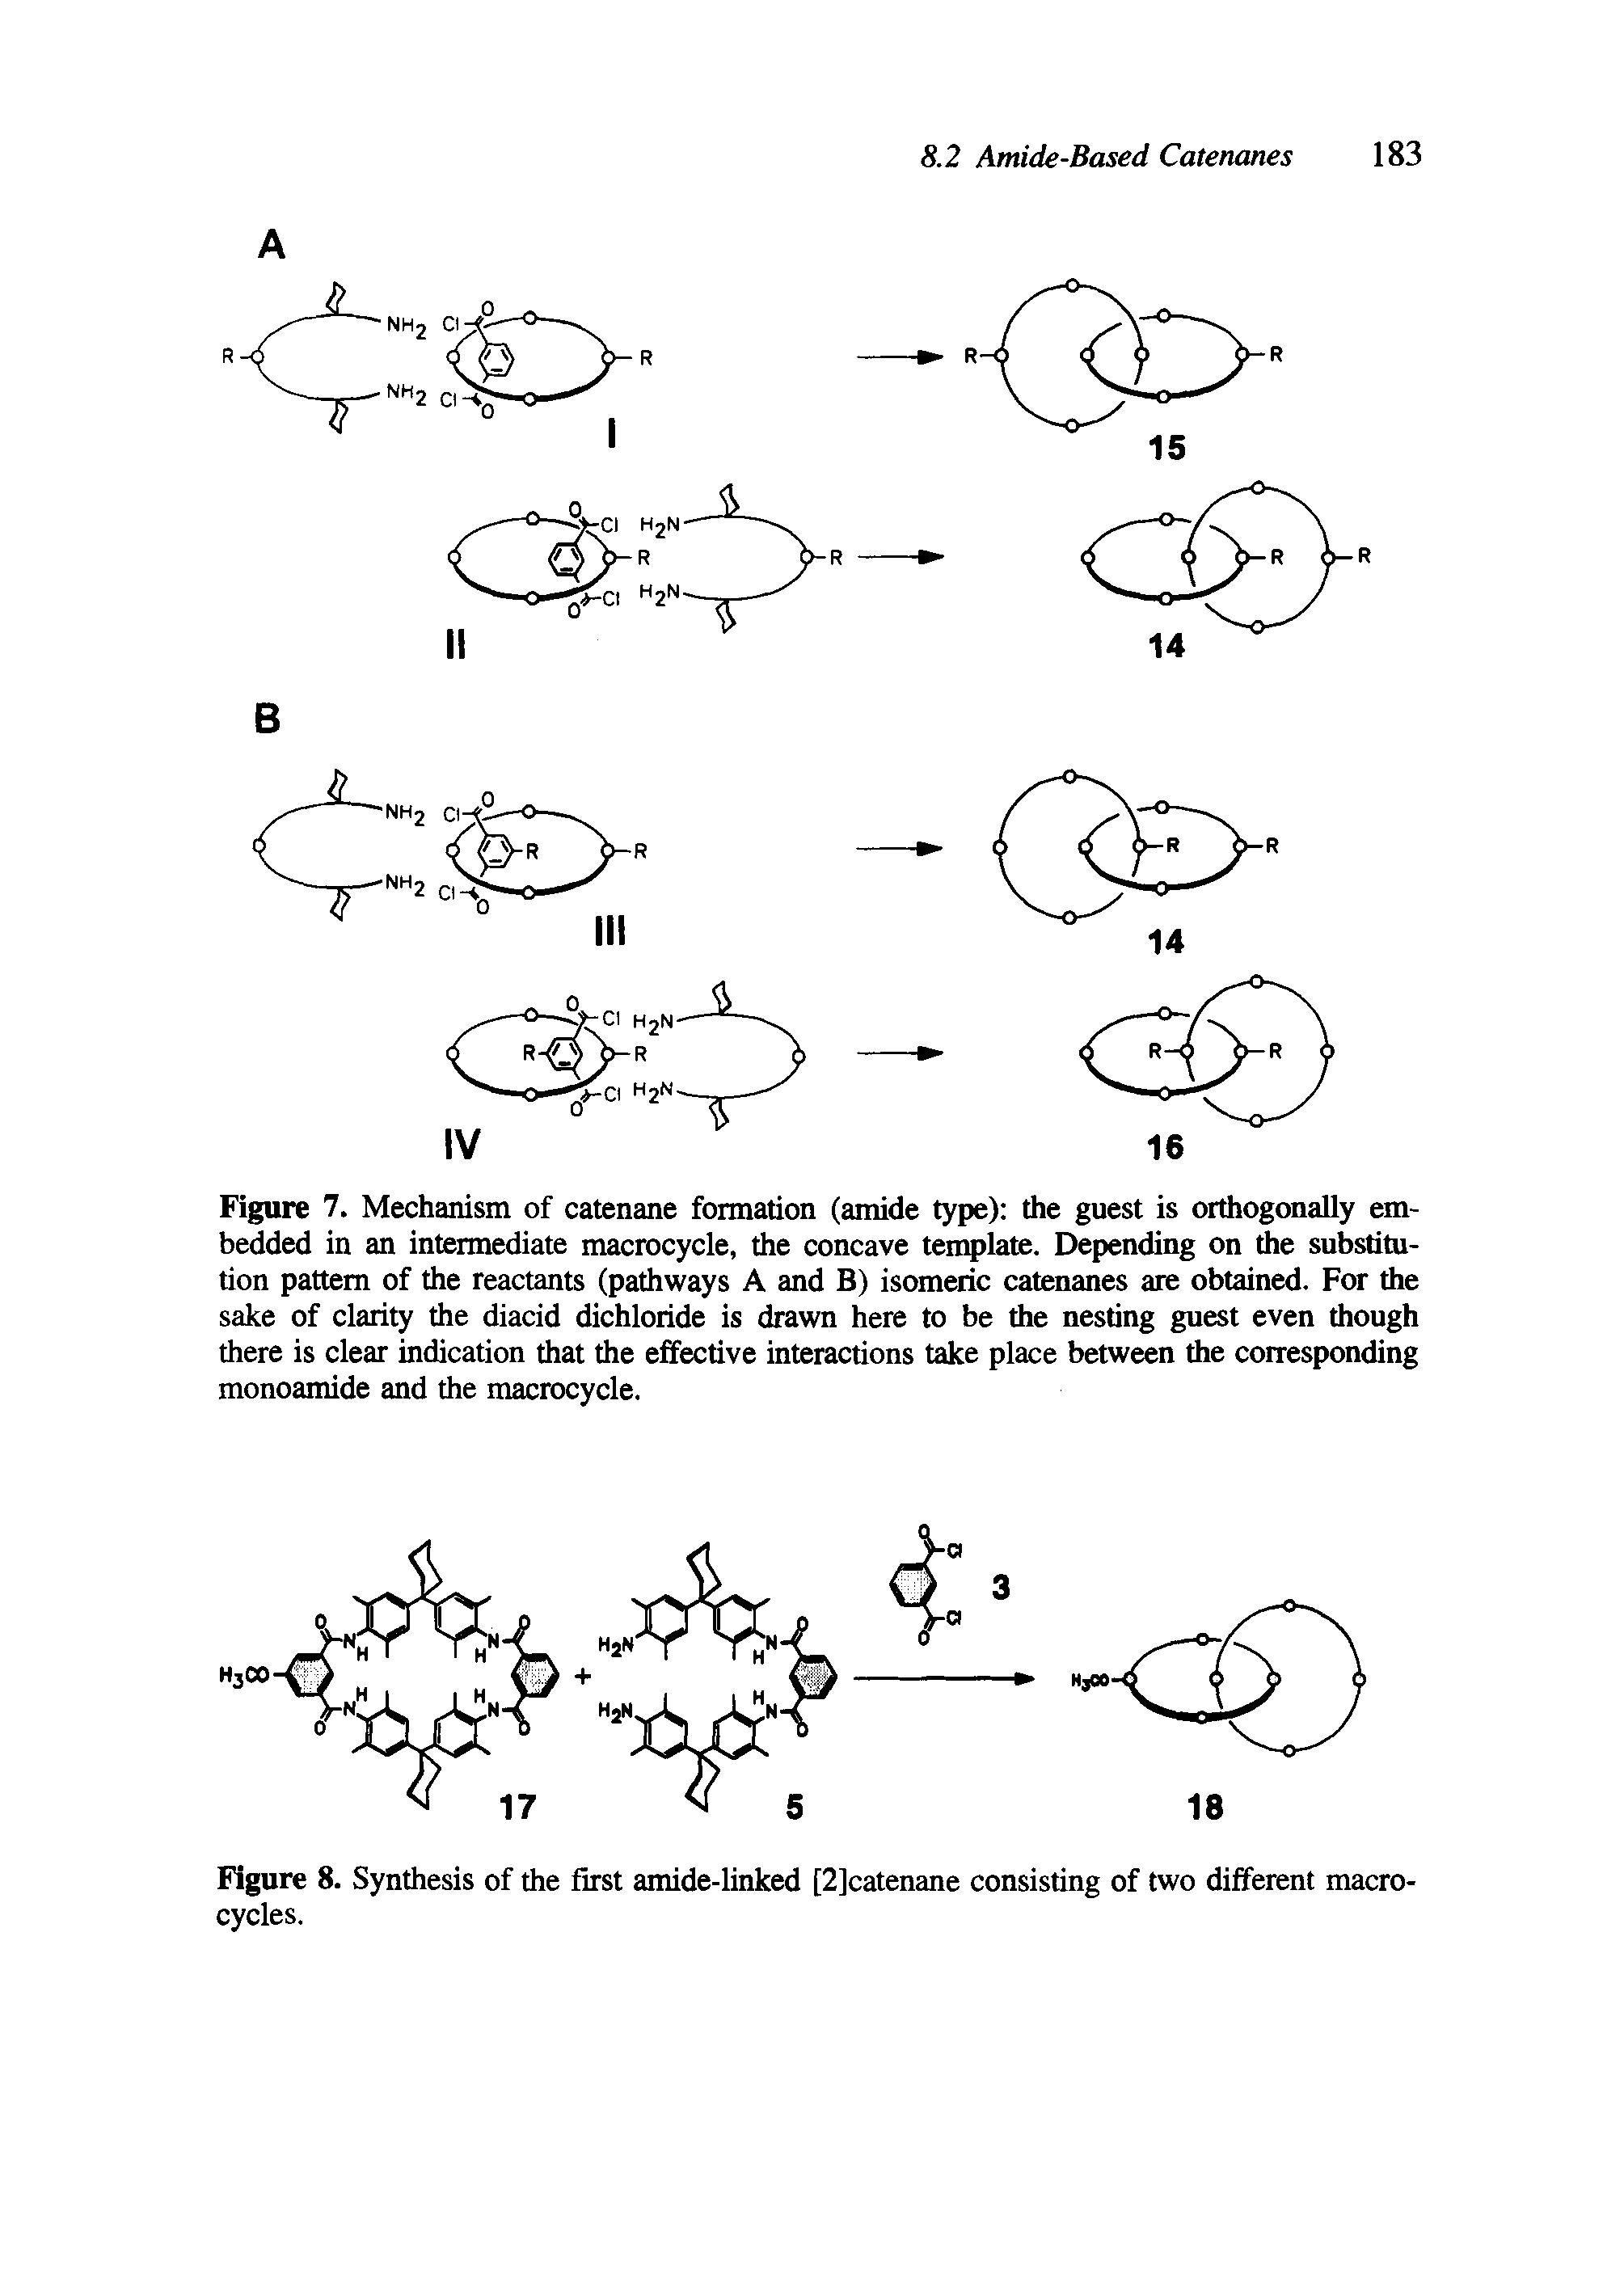 Figure 7. Mechanism of catenane formation (amide type) the guest is orthogonally embedded in an intermediate macrocycle, the concave template. Depending on the substitution pattern of the reactants (pathways A and B) isomeric catenanes are obtained. For the sake of clarity the diacid dichloride is drawn here to be the nesting guest even though there is clear indication that the effective interactions take place between the corresponding monoamide and the macrocycle.